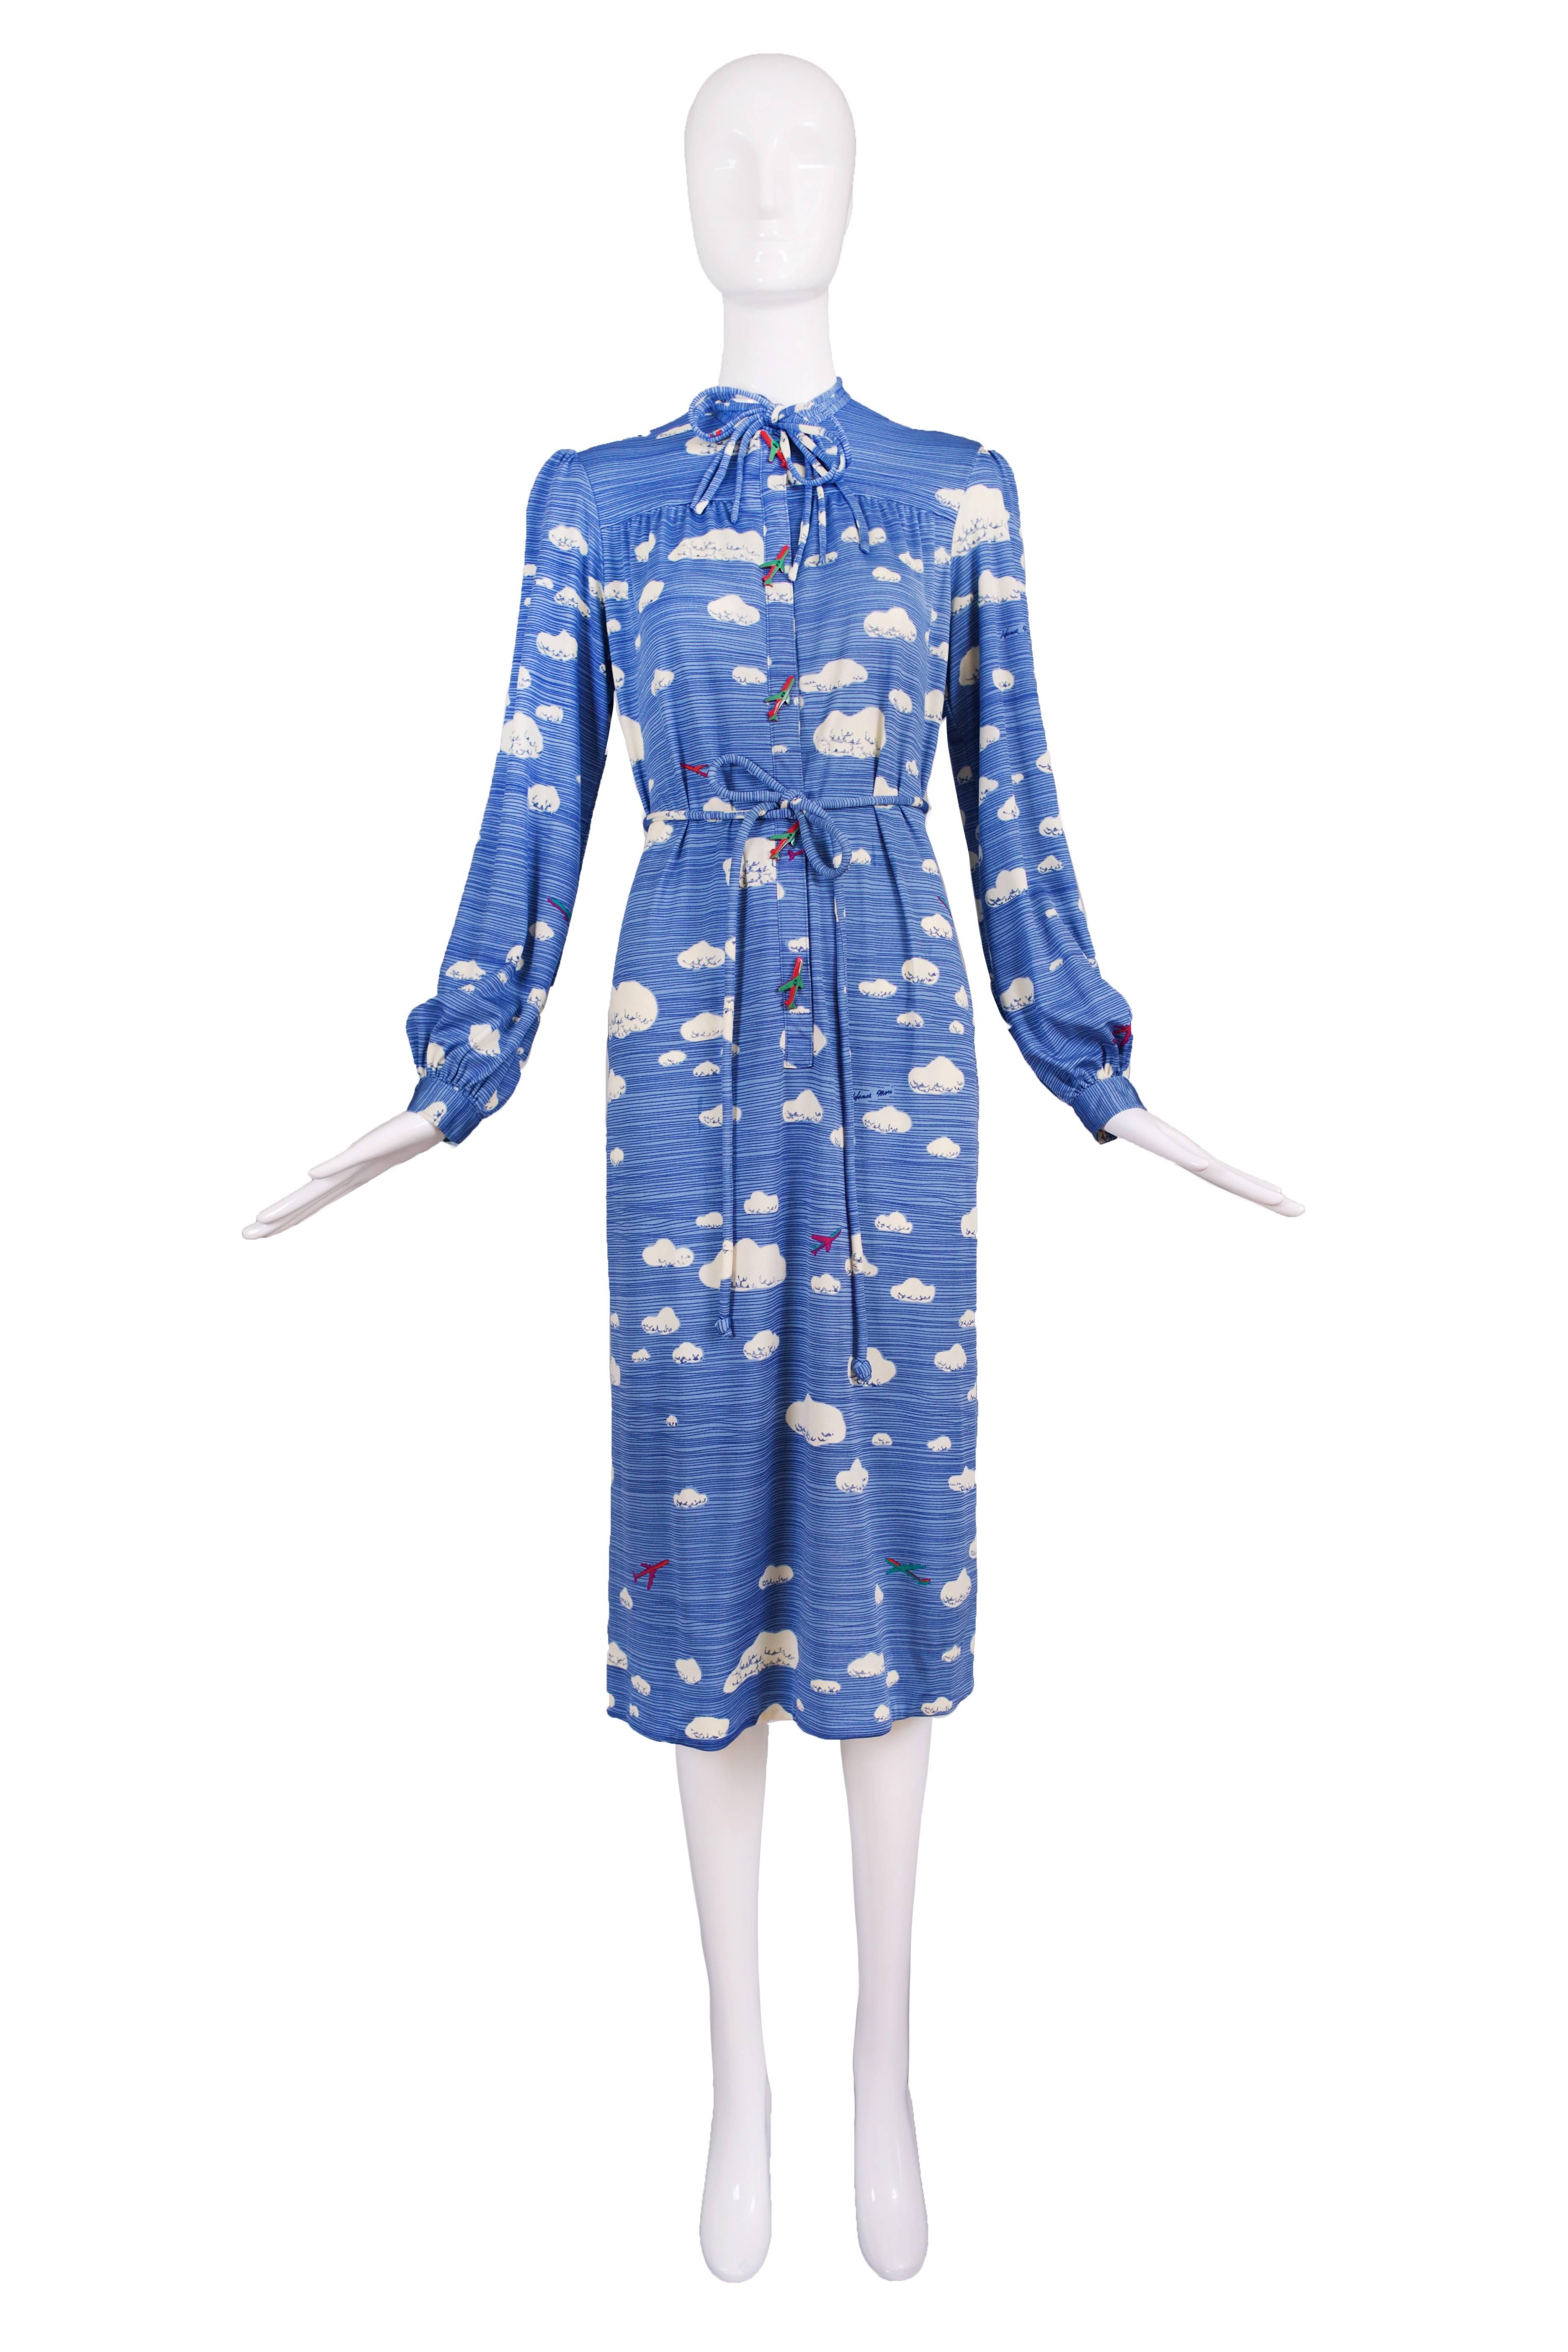 Vintage Hanae Mori nylon day dress with neck ties, self waist tie, side pockets and featuring a cloud and airplane print with bakelite airplane buttons. Size tag L. In excellent condition.
MEASUREMENTS:
Shoulders - 15